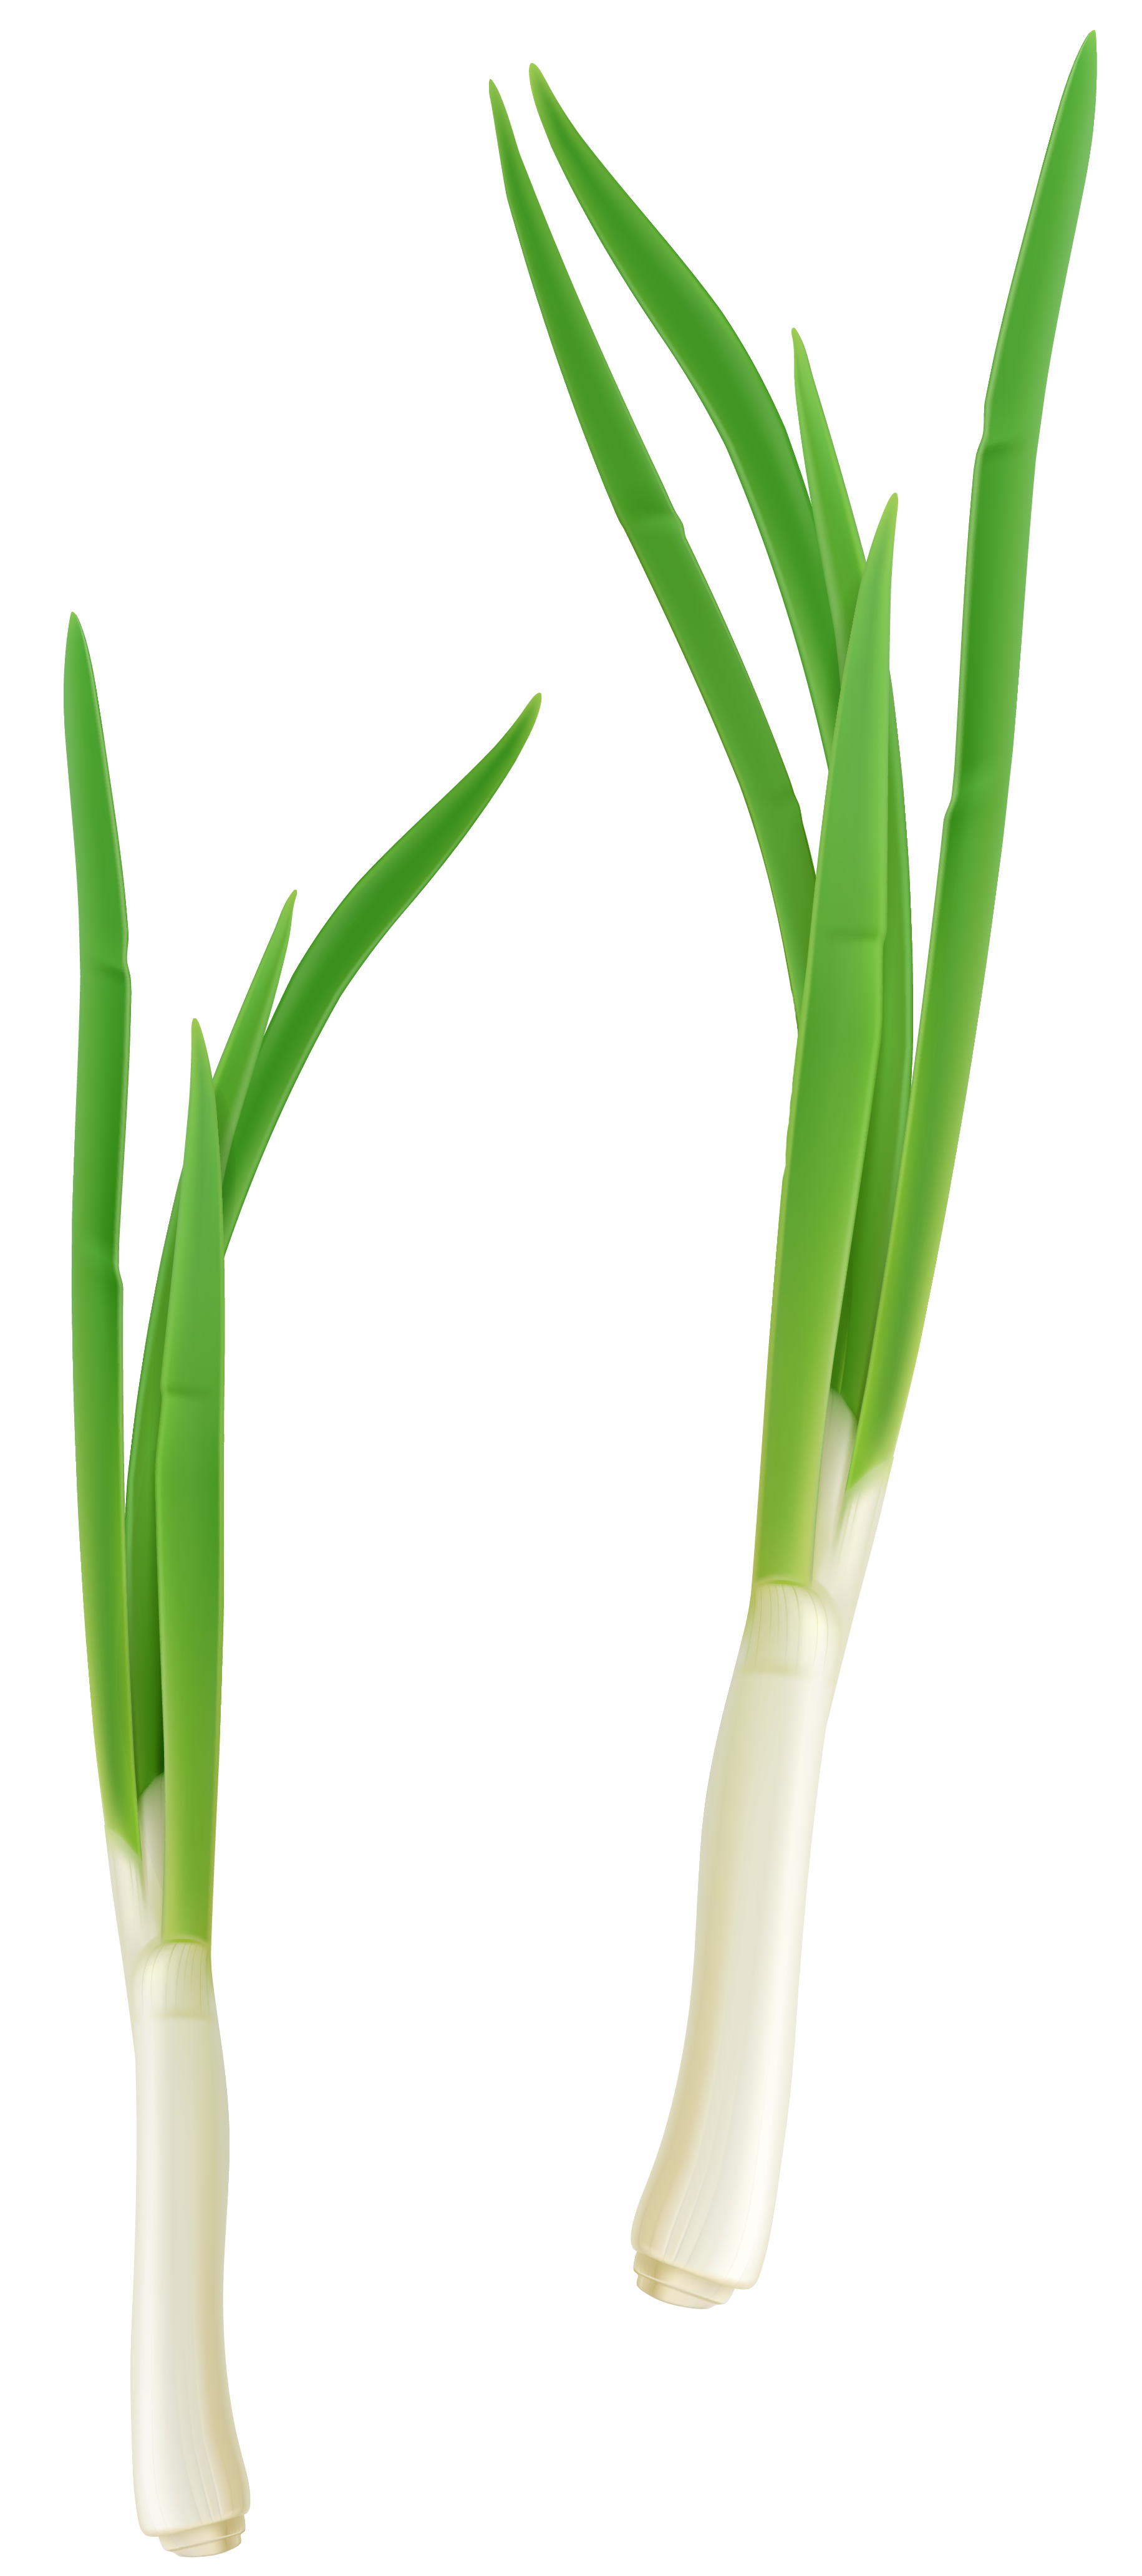 Green Fresh Onion PNG Clipart Quality Image And Transparent PNG Free Clipart